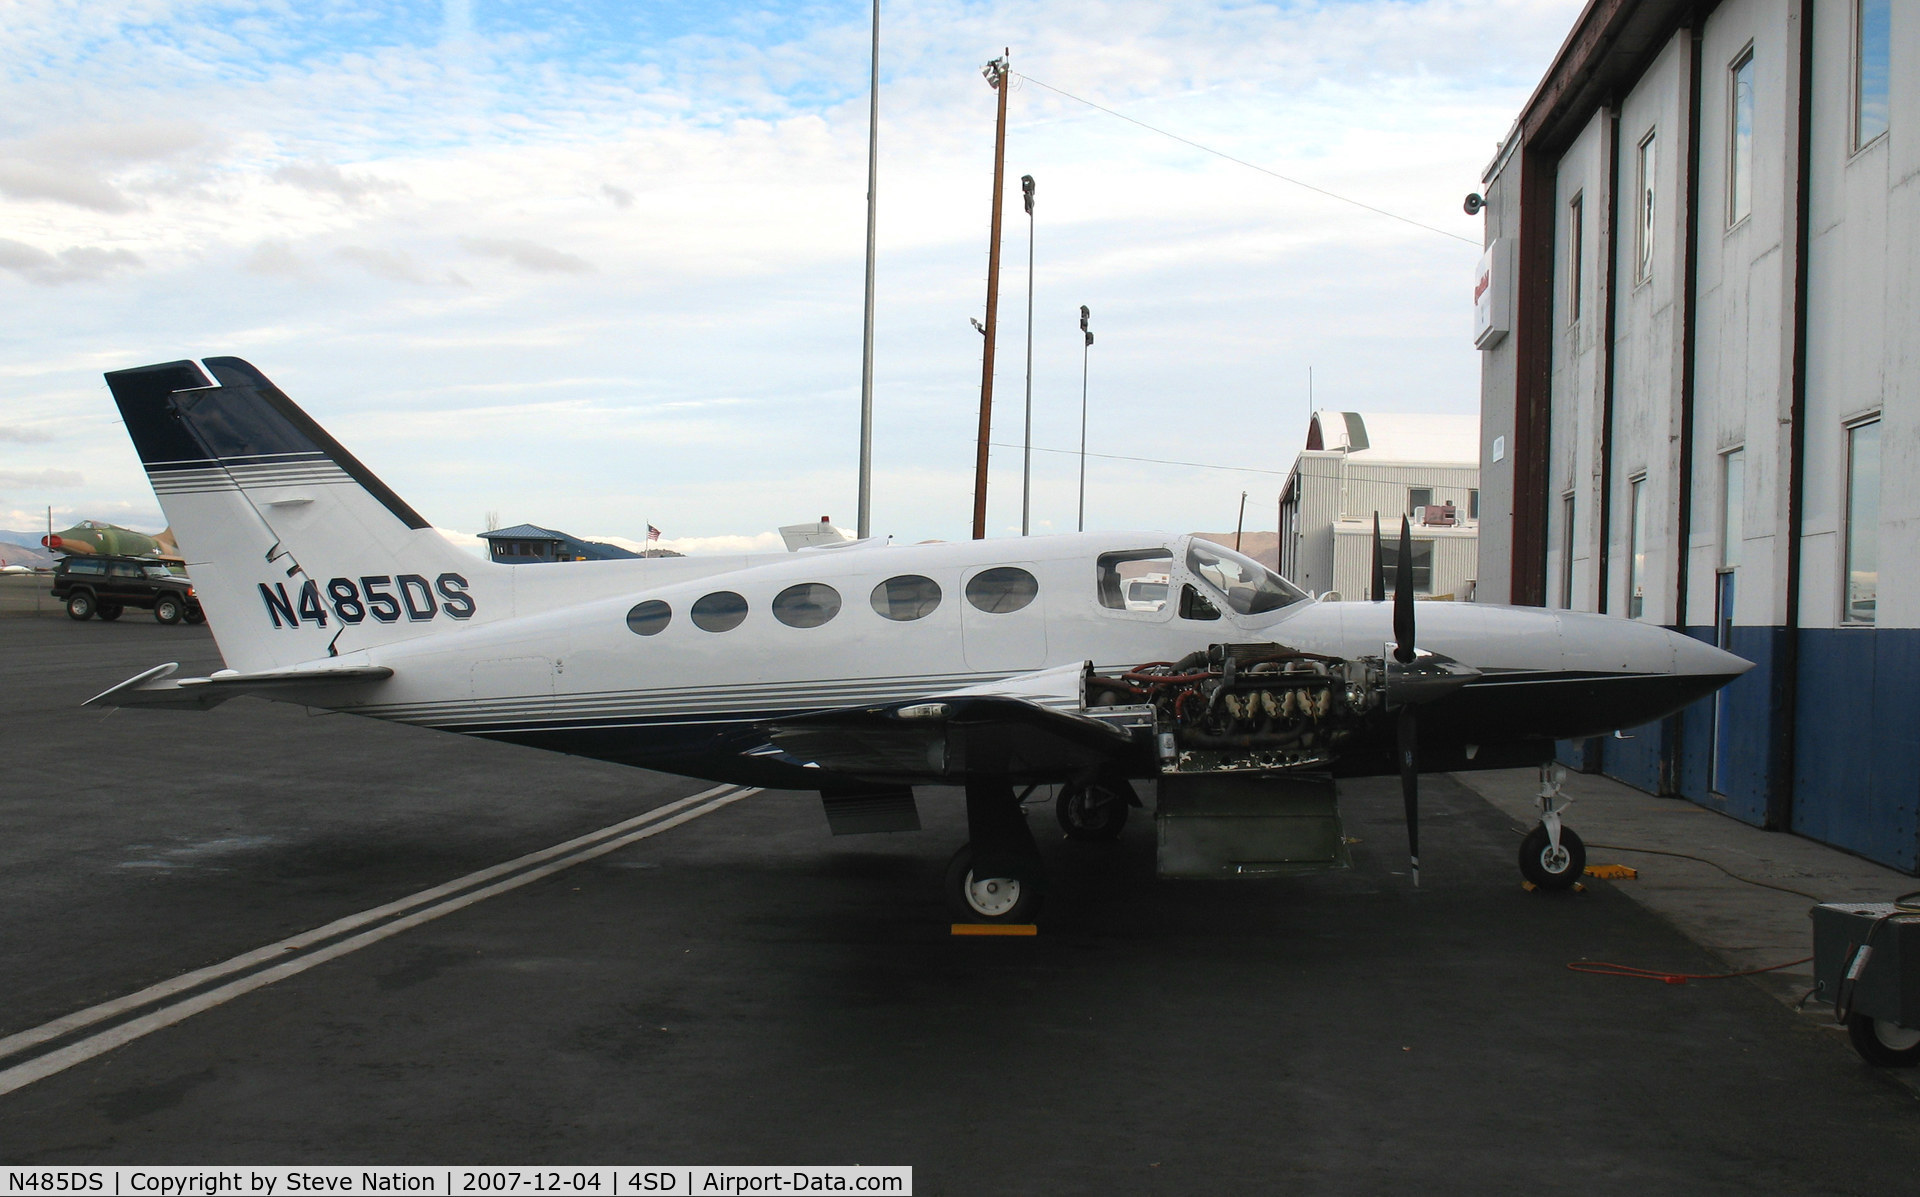 N485DS, 1978 Cessna 421C Golden Eagle C/N 421C0459, Dome Products (Sparks, NV)  1978 Cessna 421C @ Reno-Stead